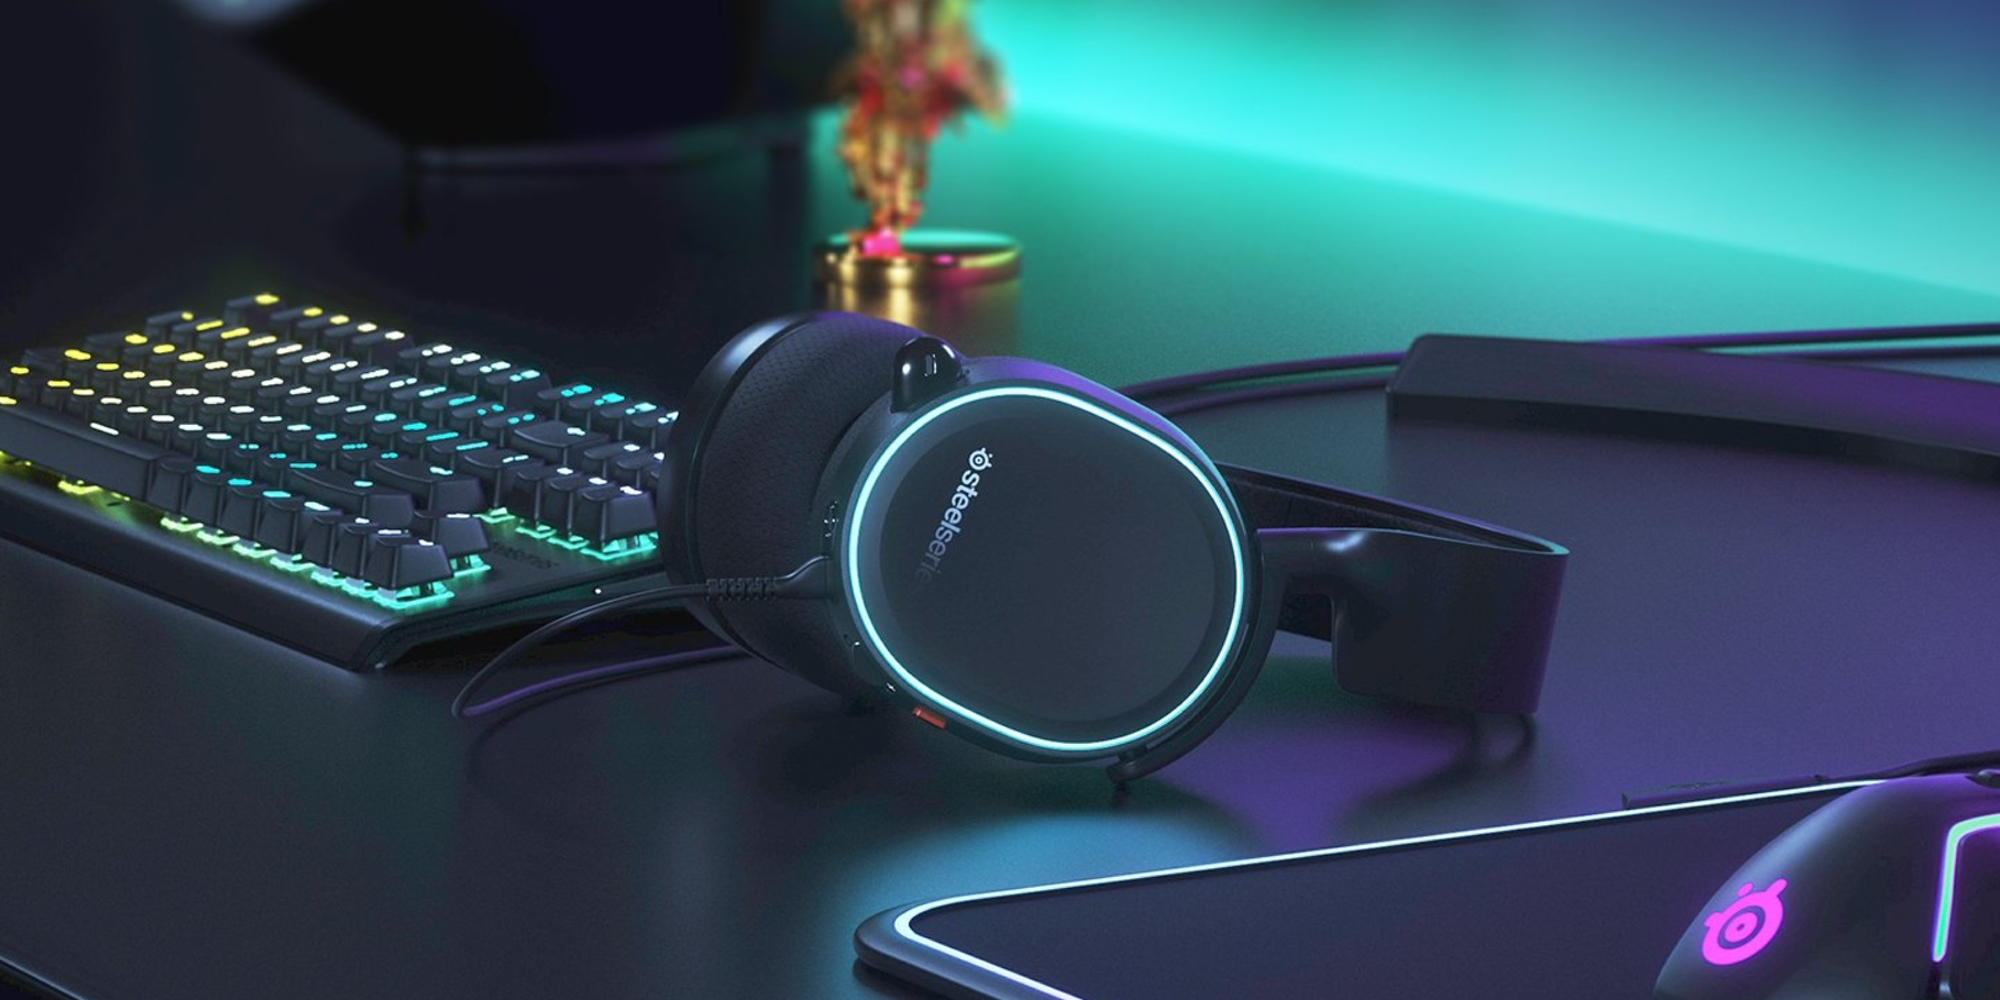 steelseries arctis 5 gaming headset 2019 edition review